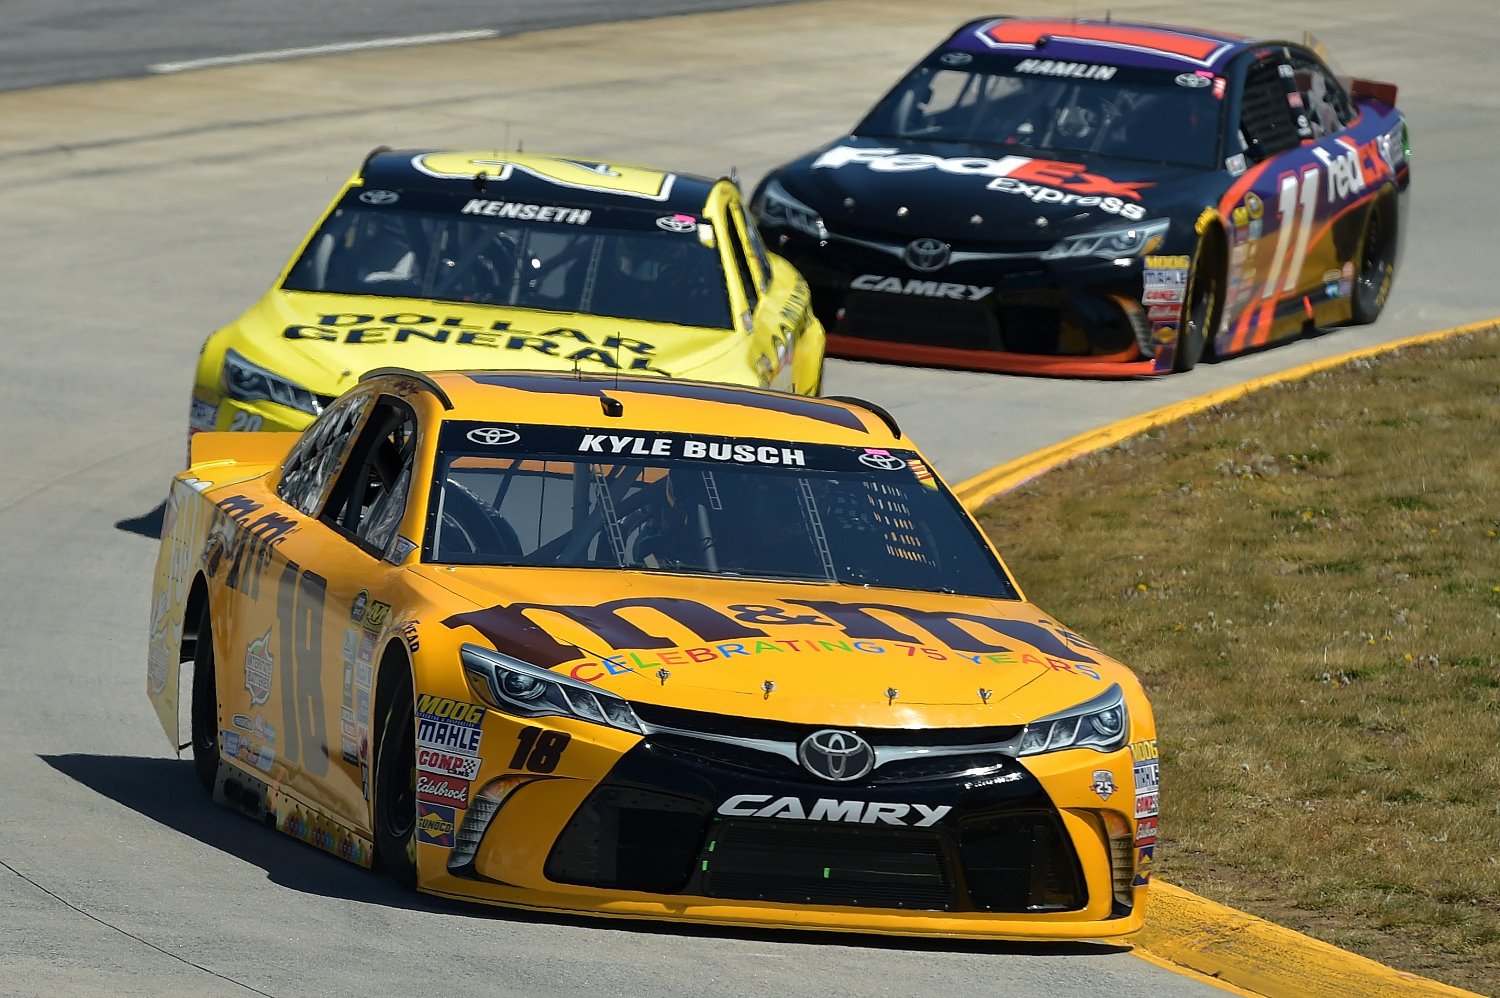 Busch leads on way to victory